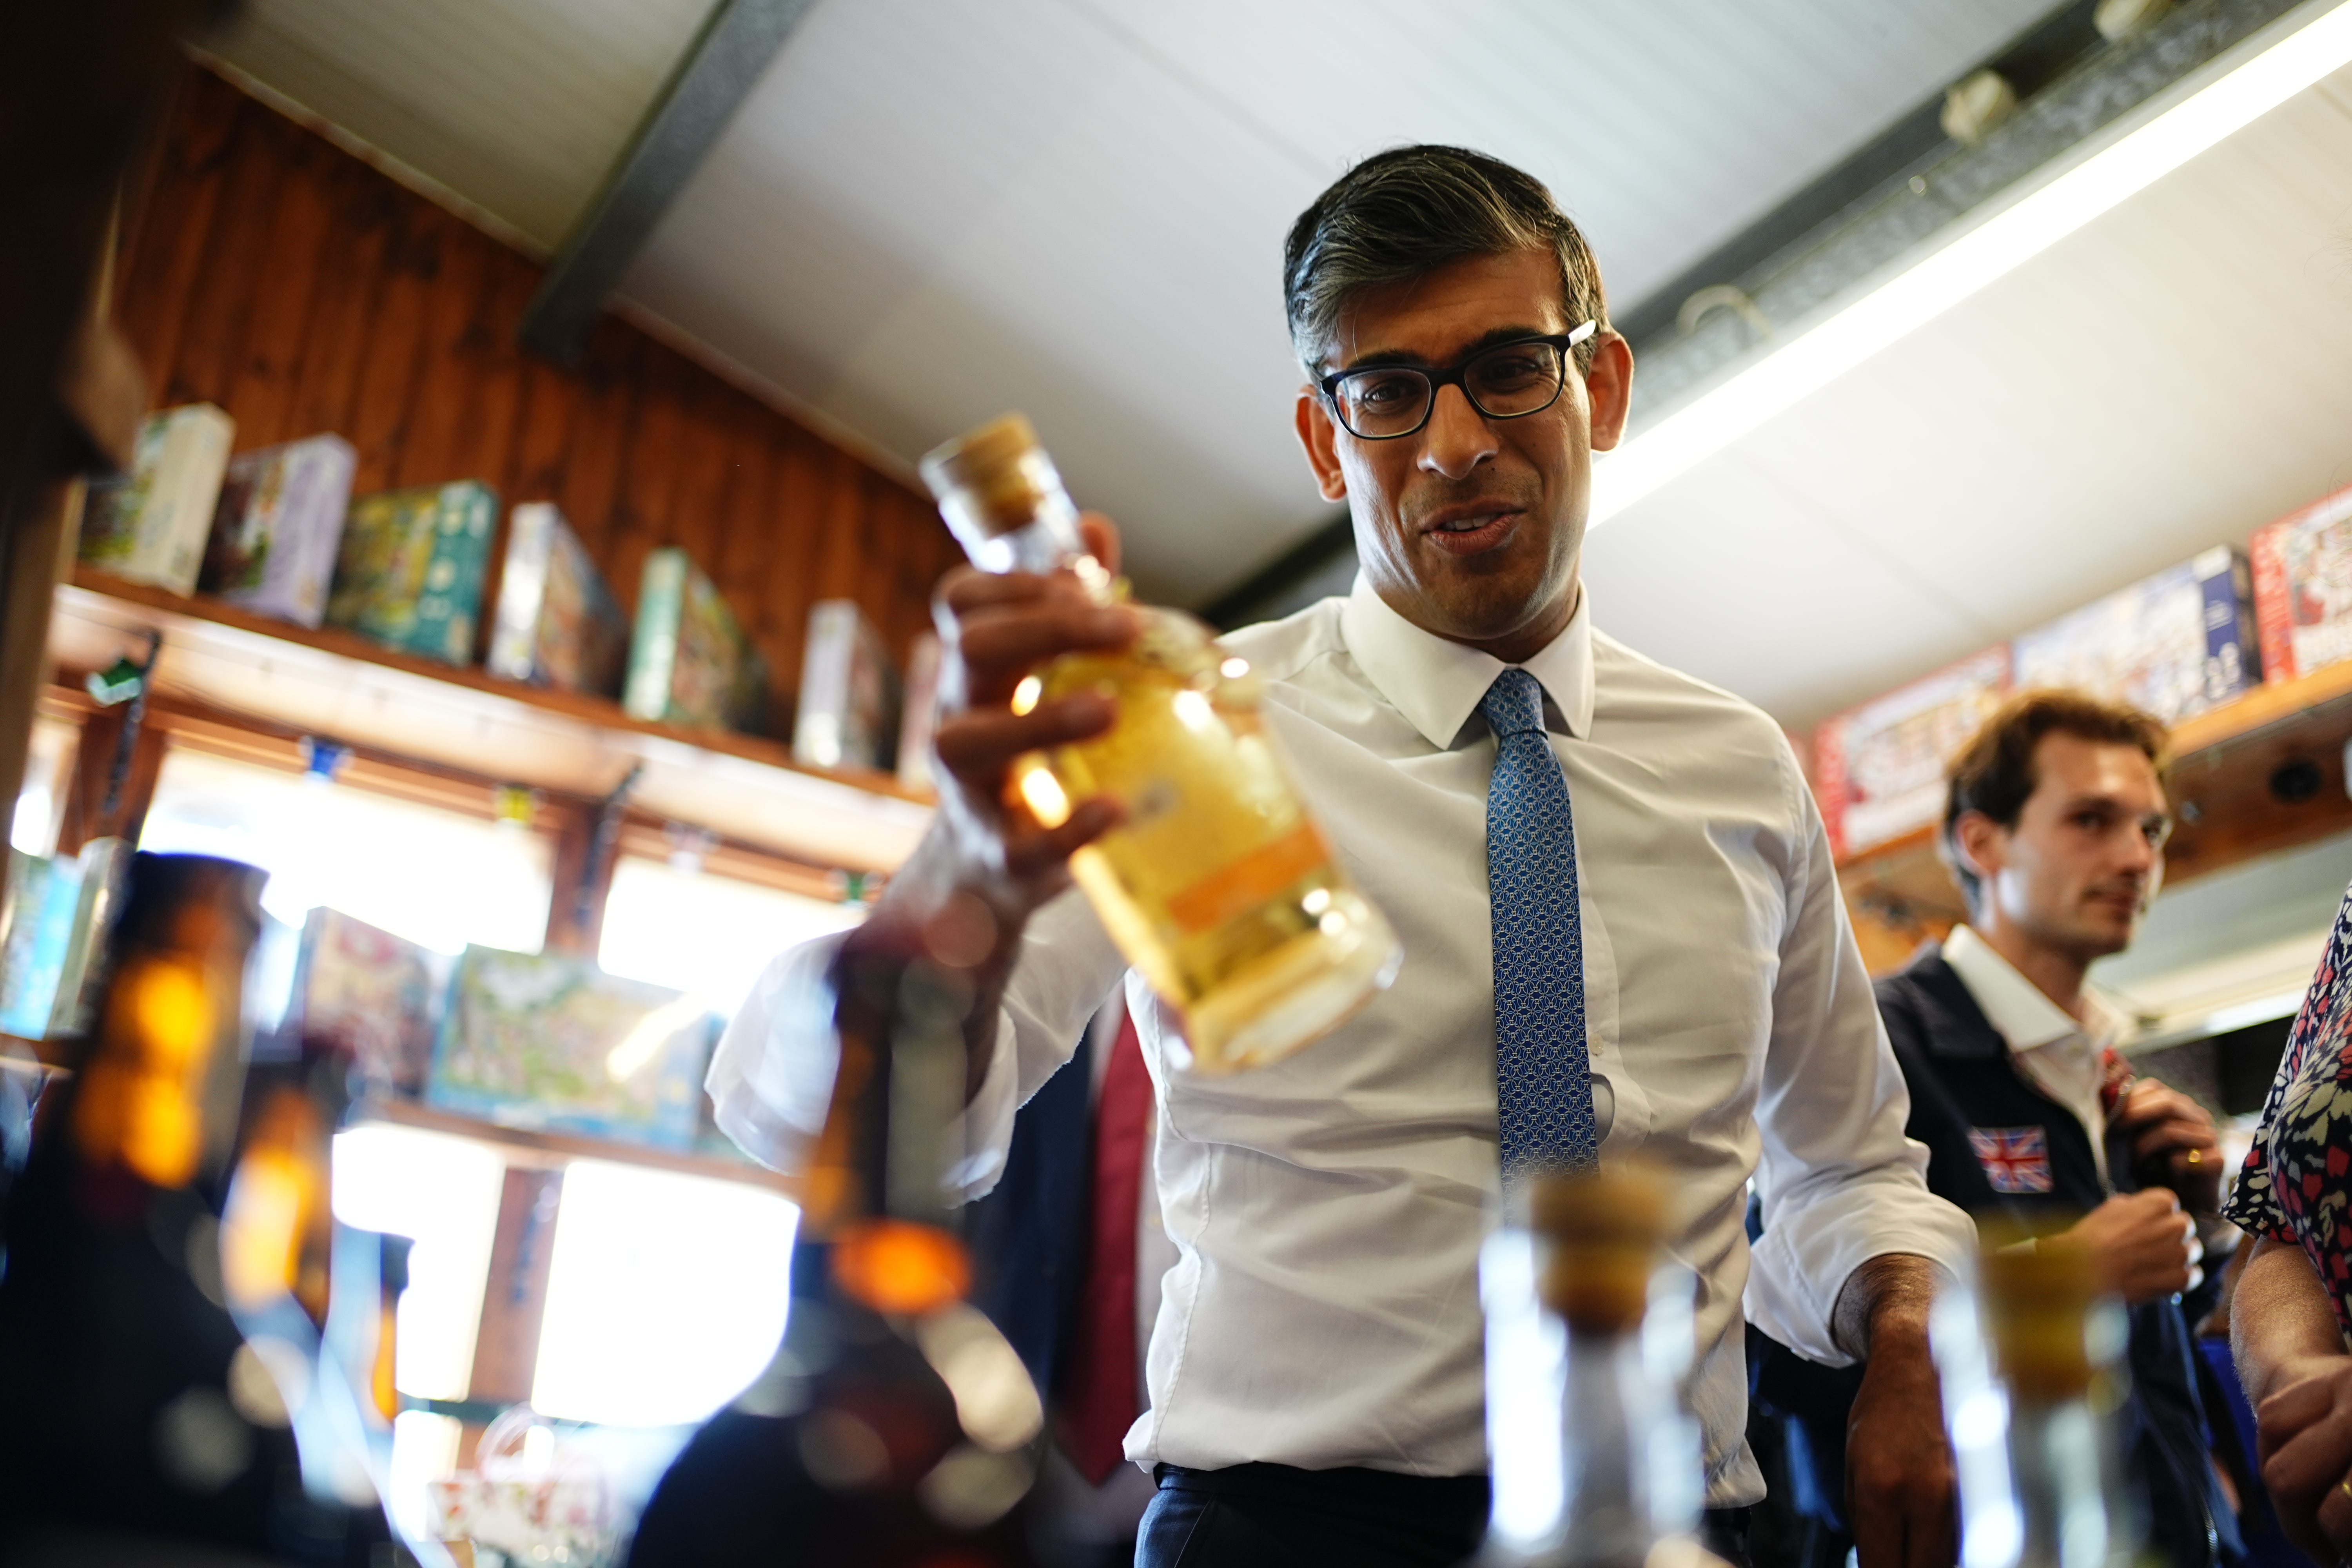 Prime Minister Rishi Sunak holding a glass bottle during a visit to a farm shop in Wales (Aaron Chown/PA)